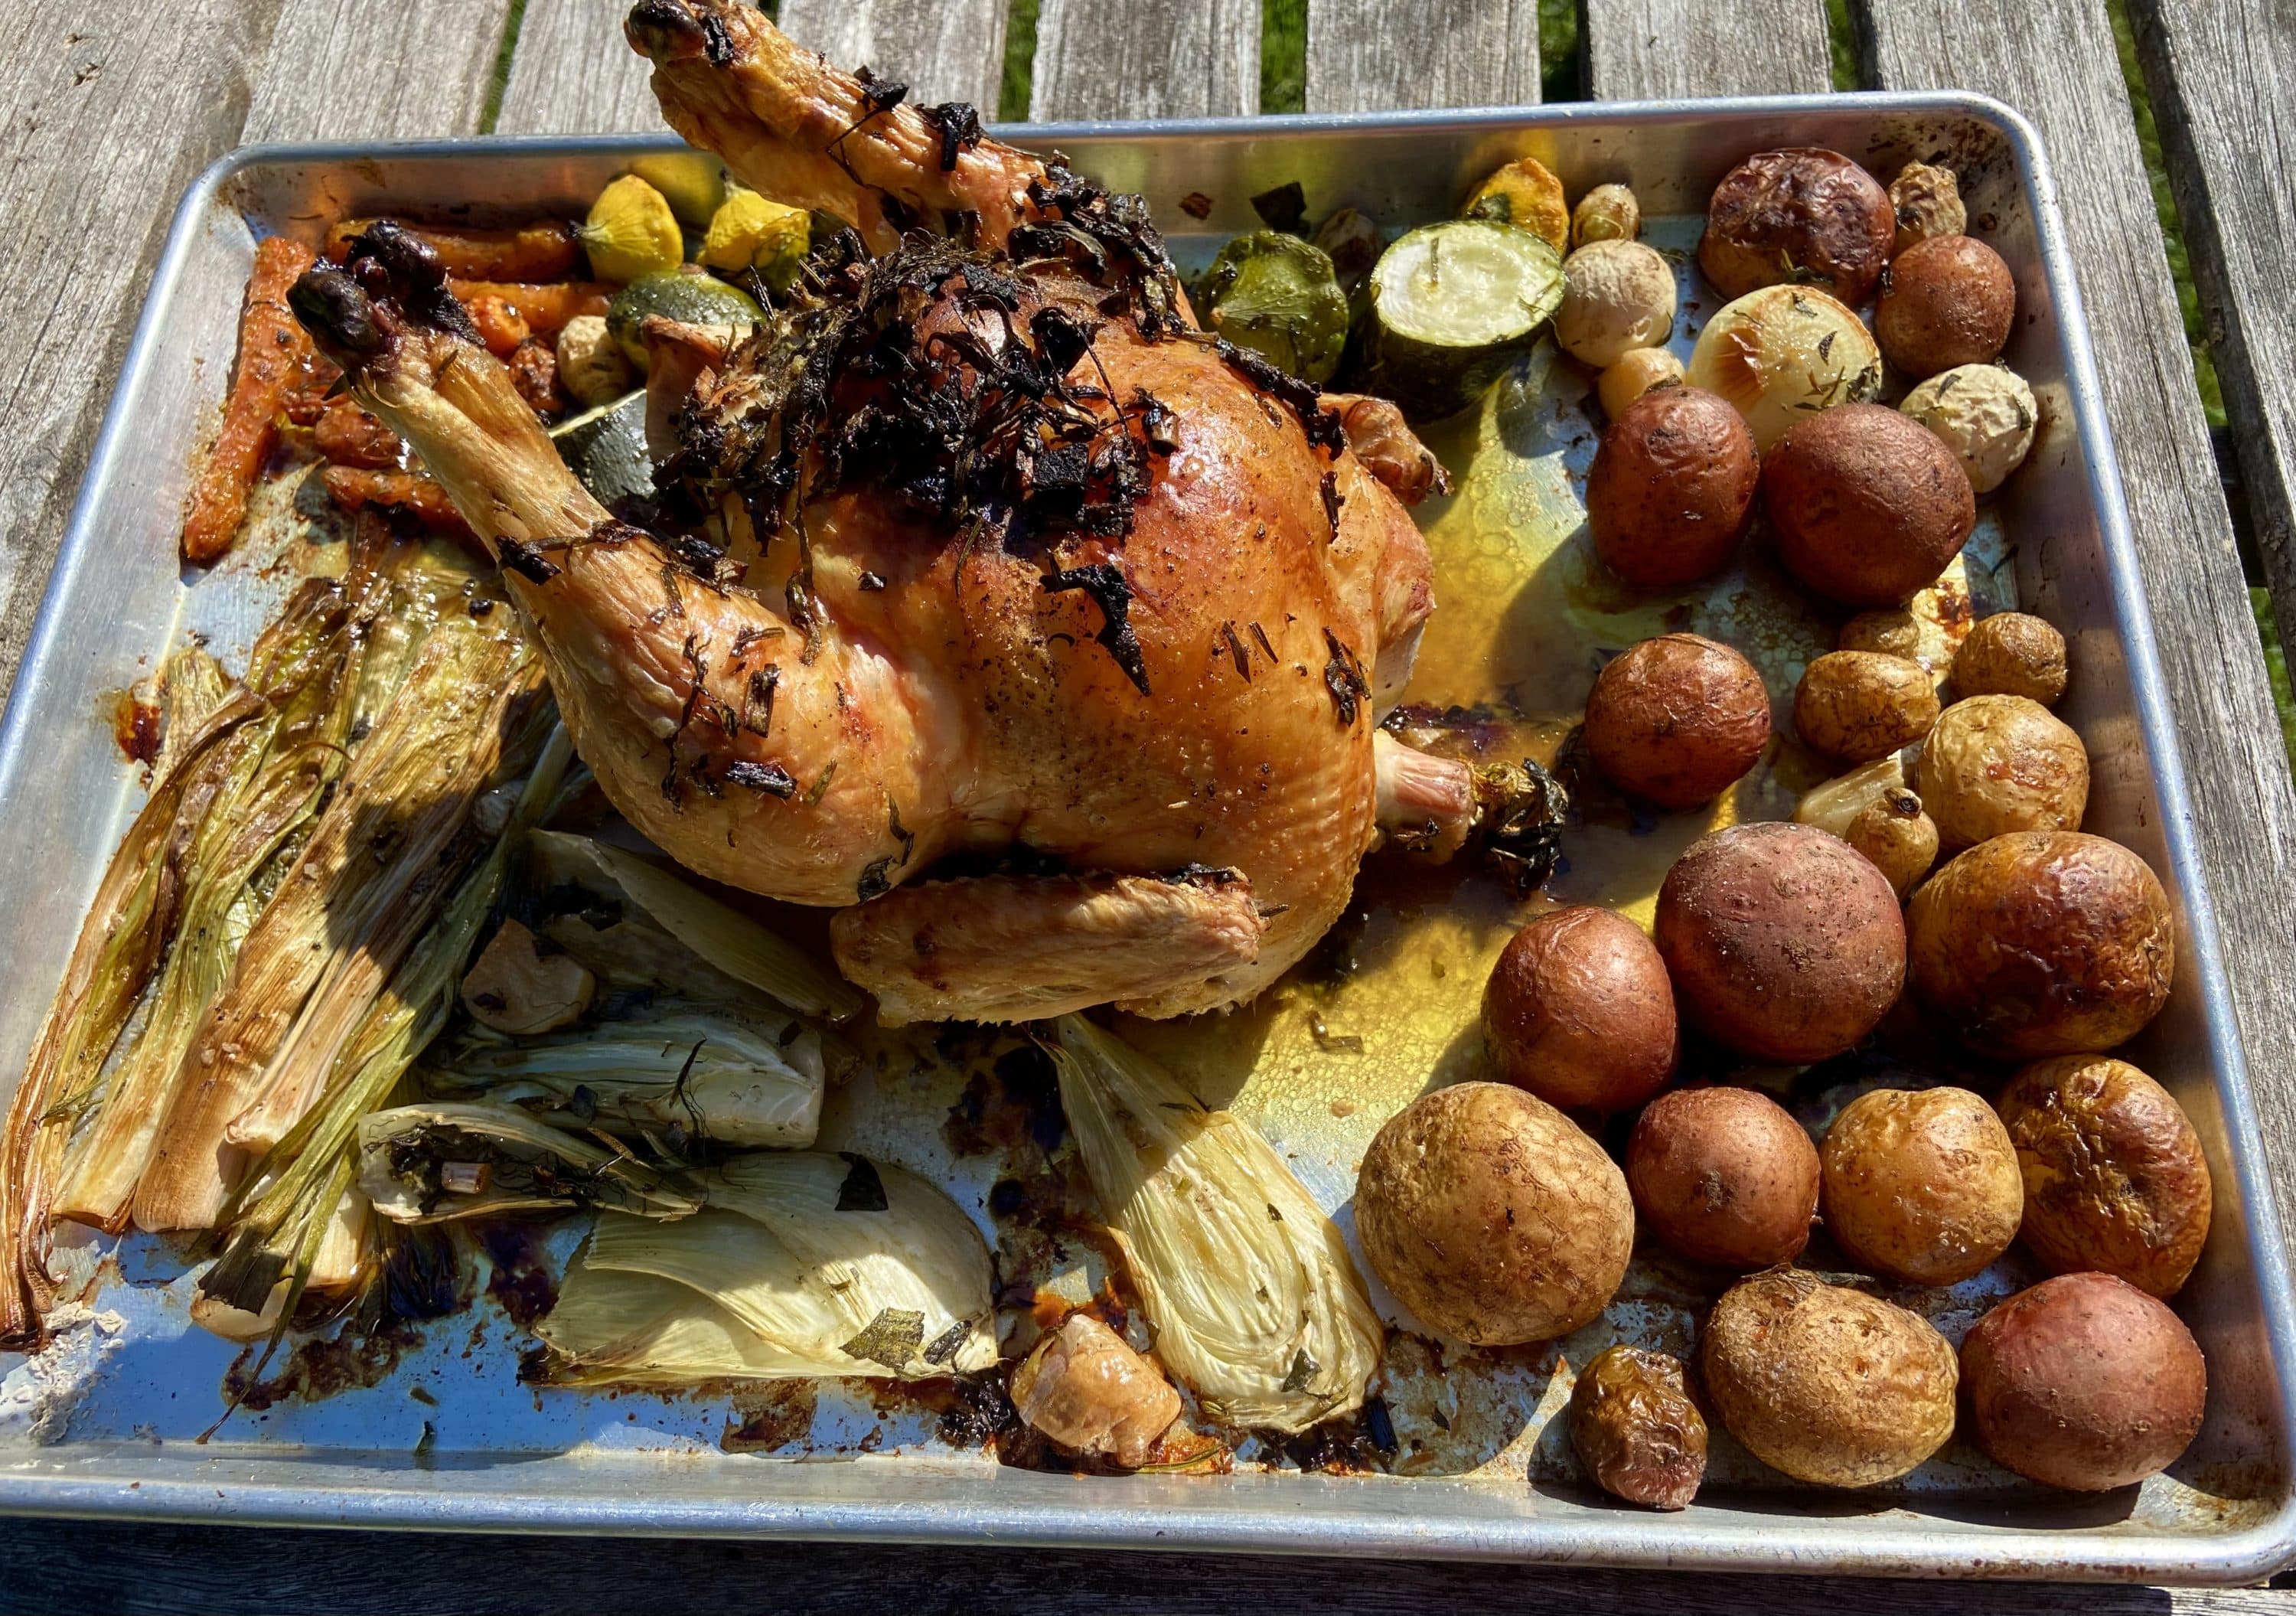 1 roast chicken, 3 meals: Make the most of your kitchen time as fall begins and life gets busy